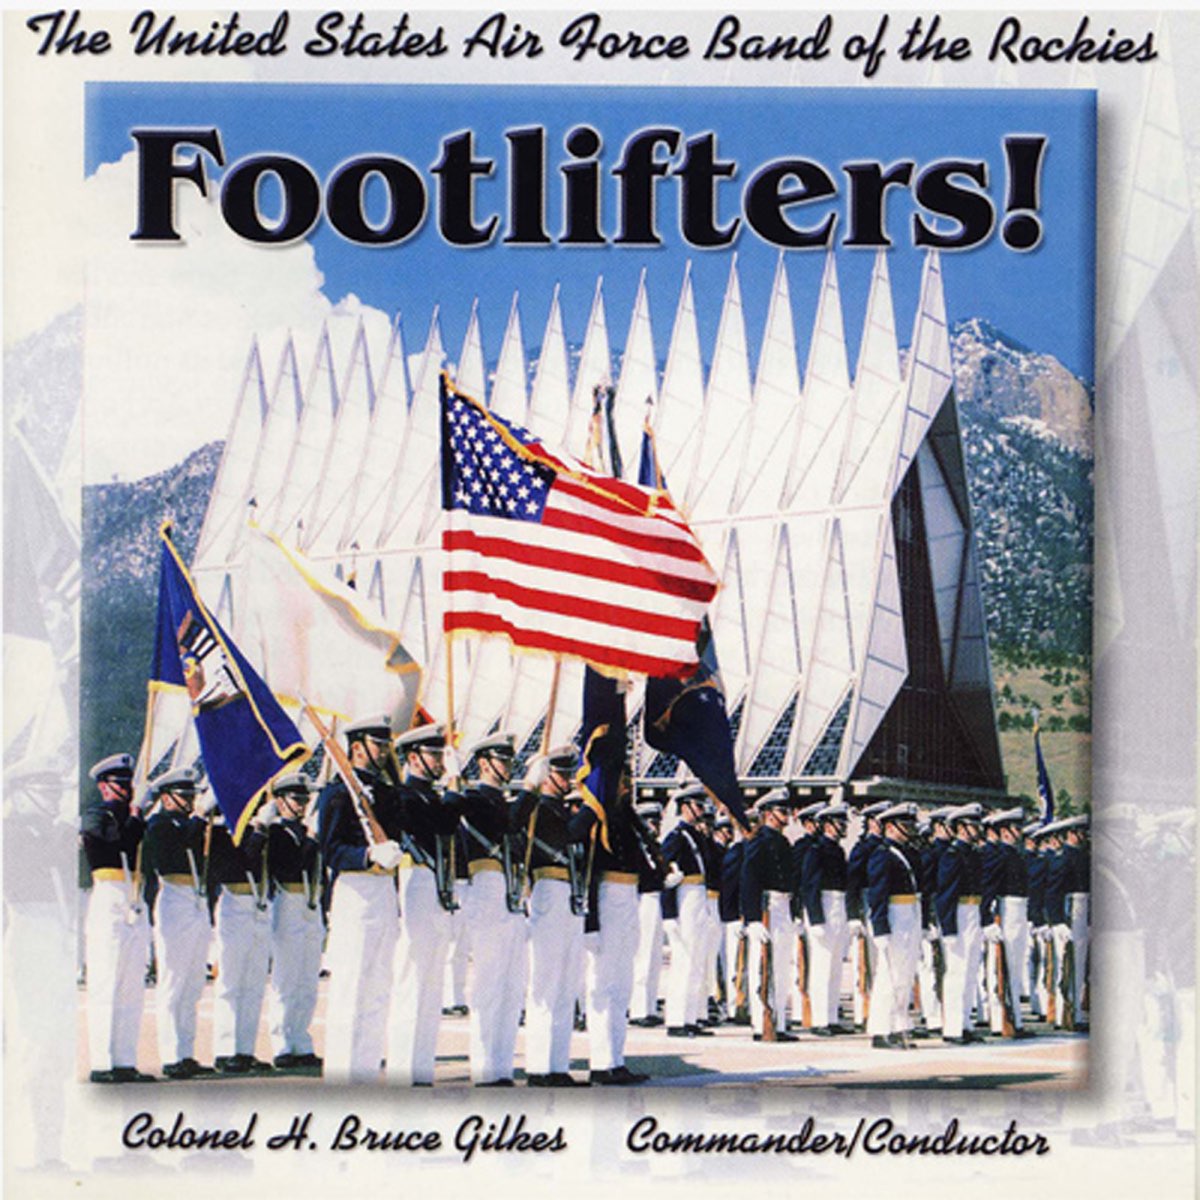 Footlifters! / US Air Force Band of the Rockies